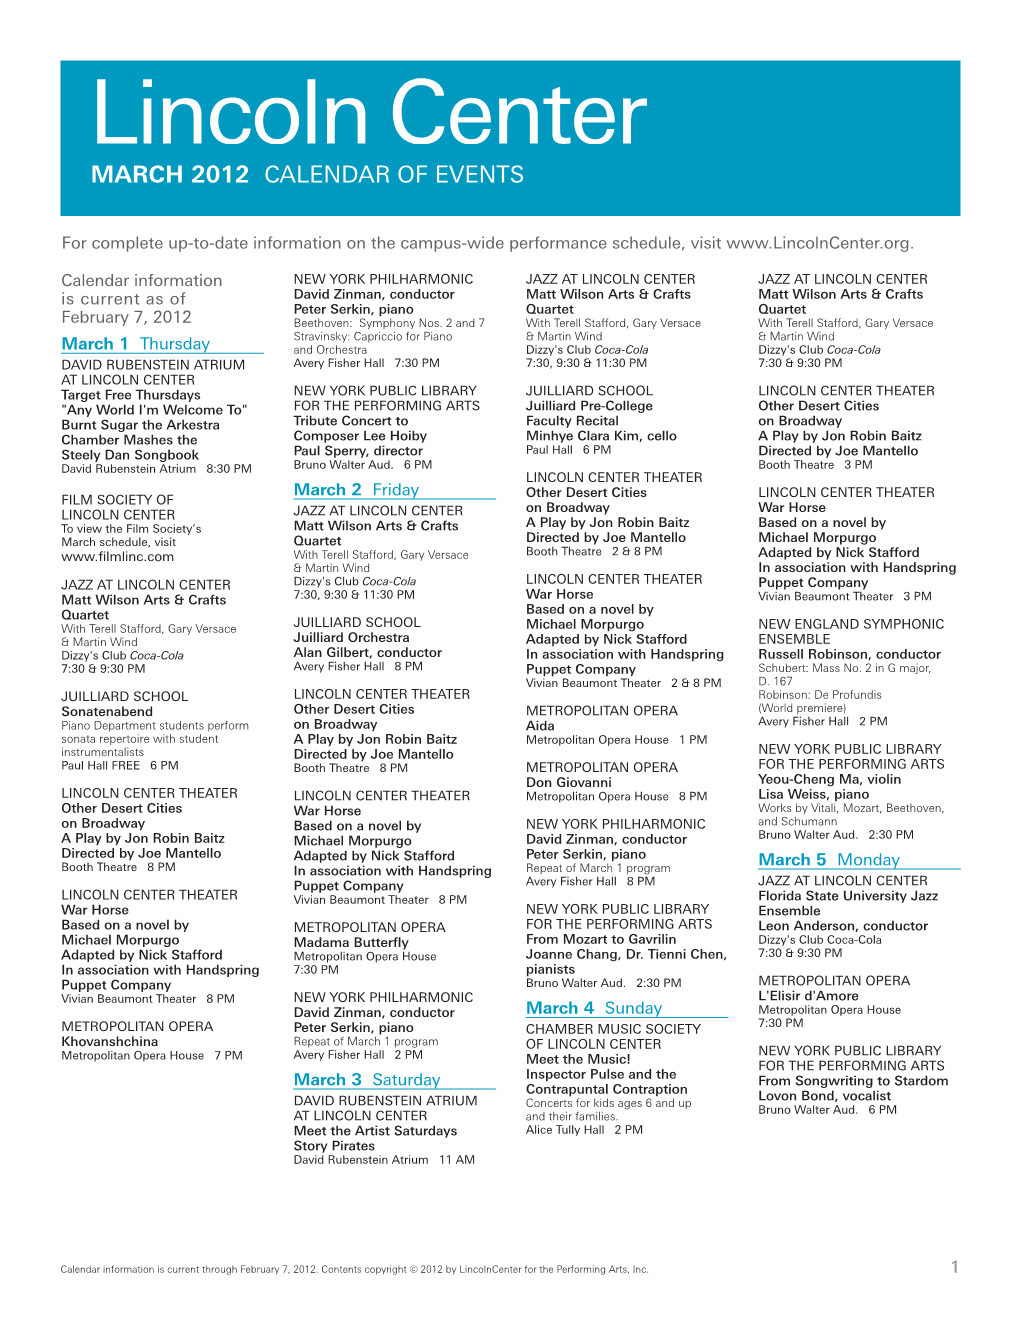 March 2012 Calendar of Events